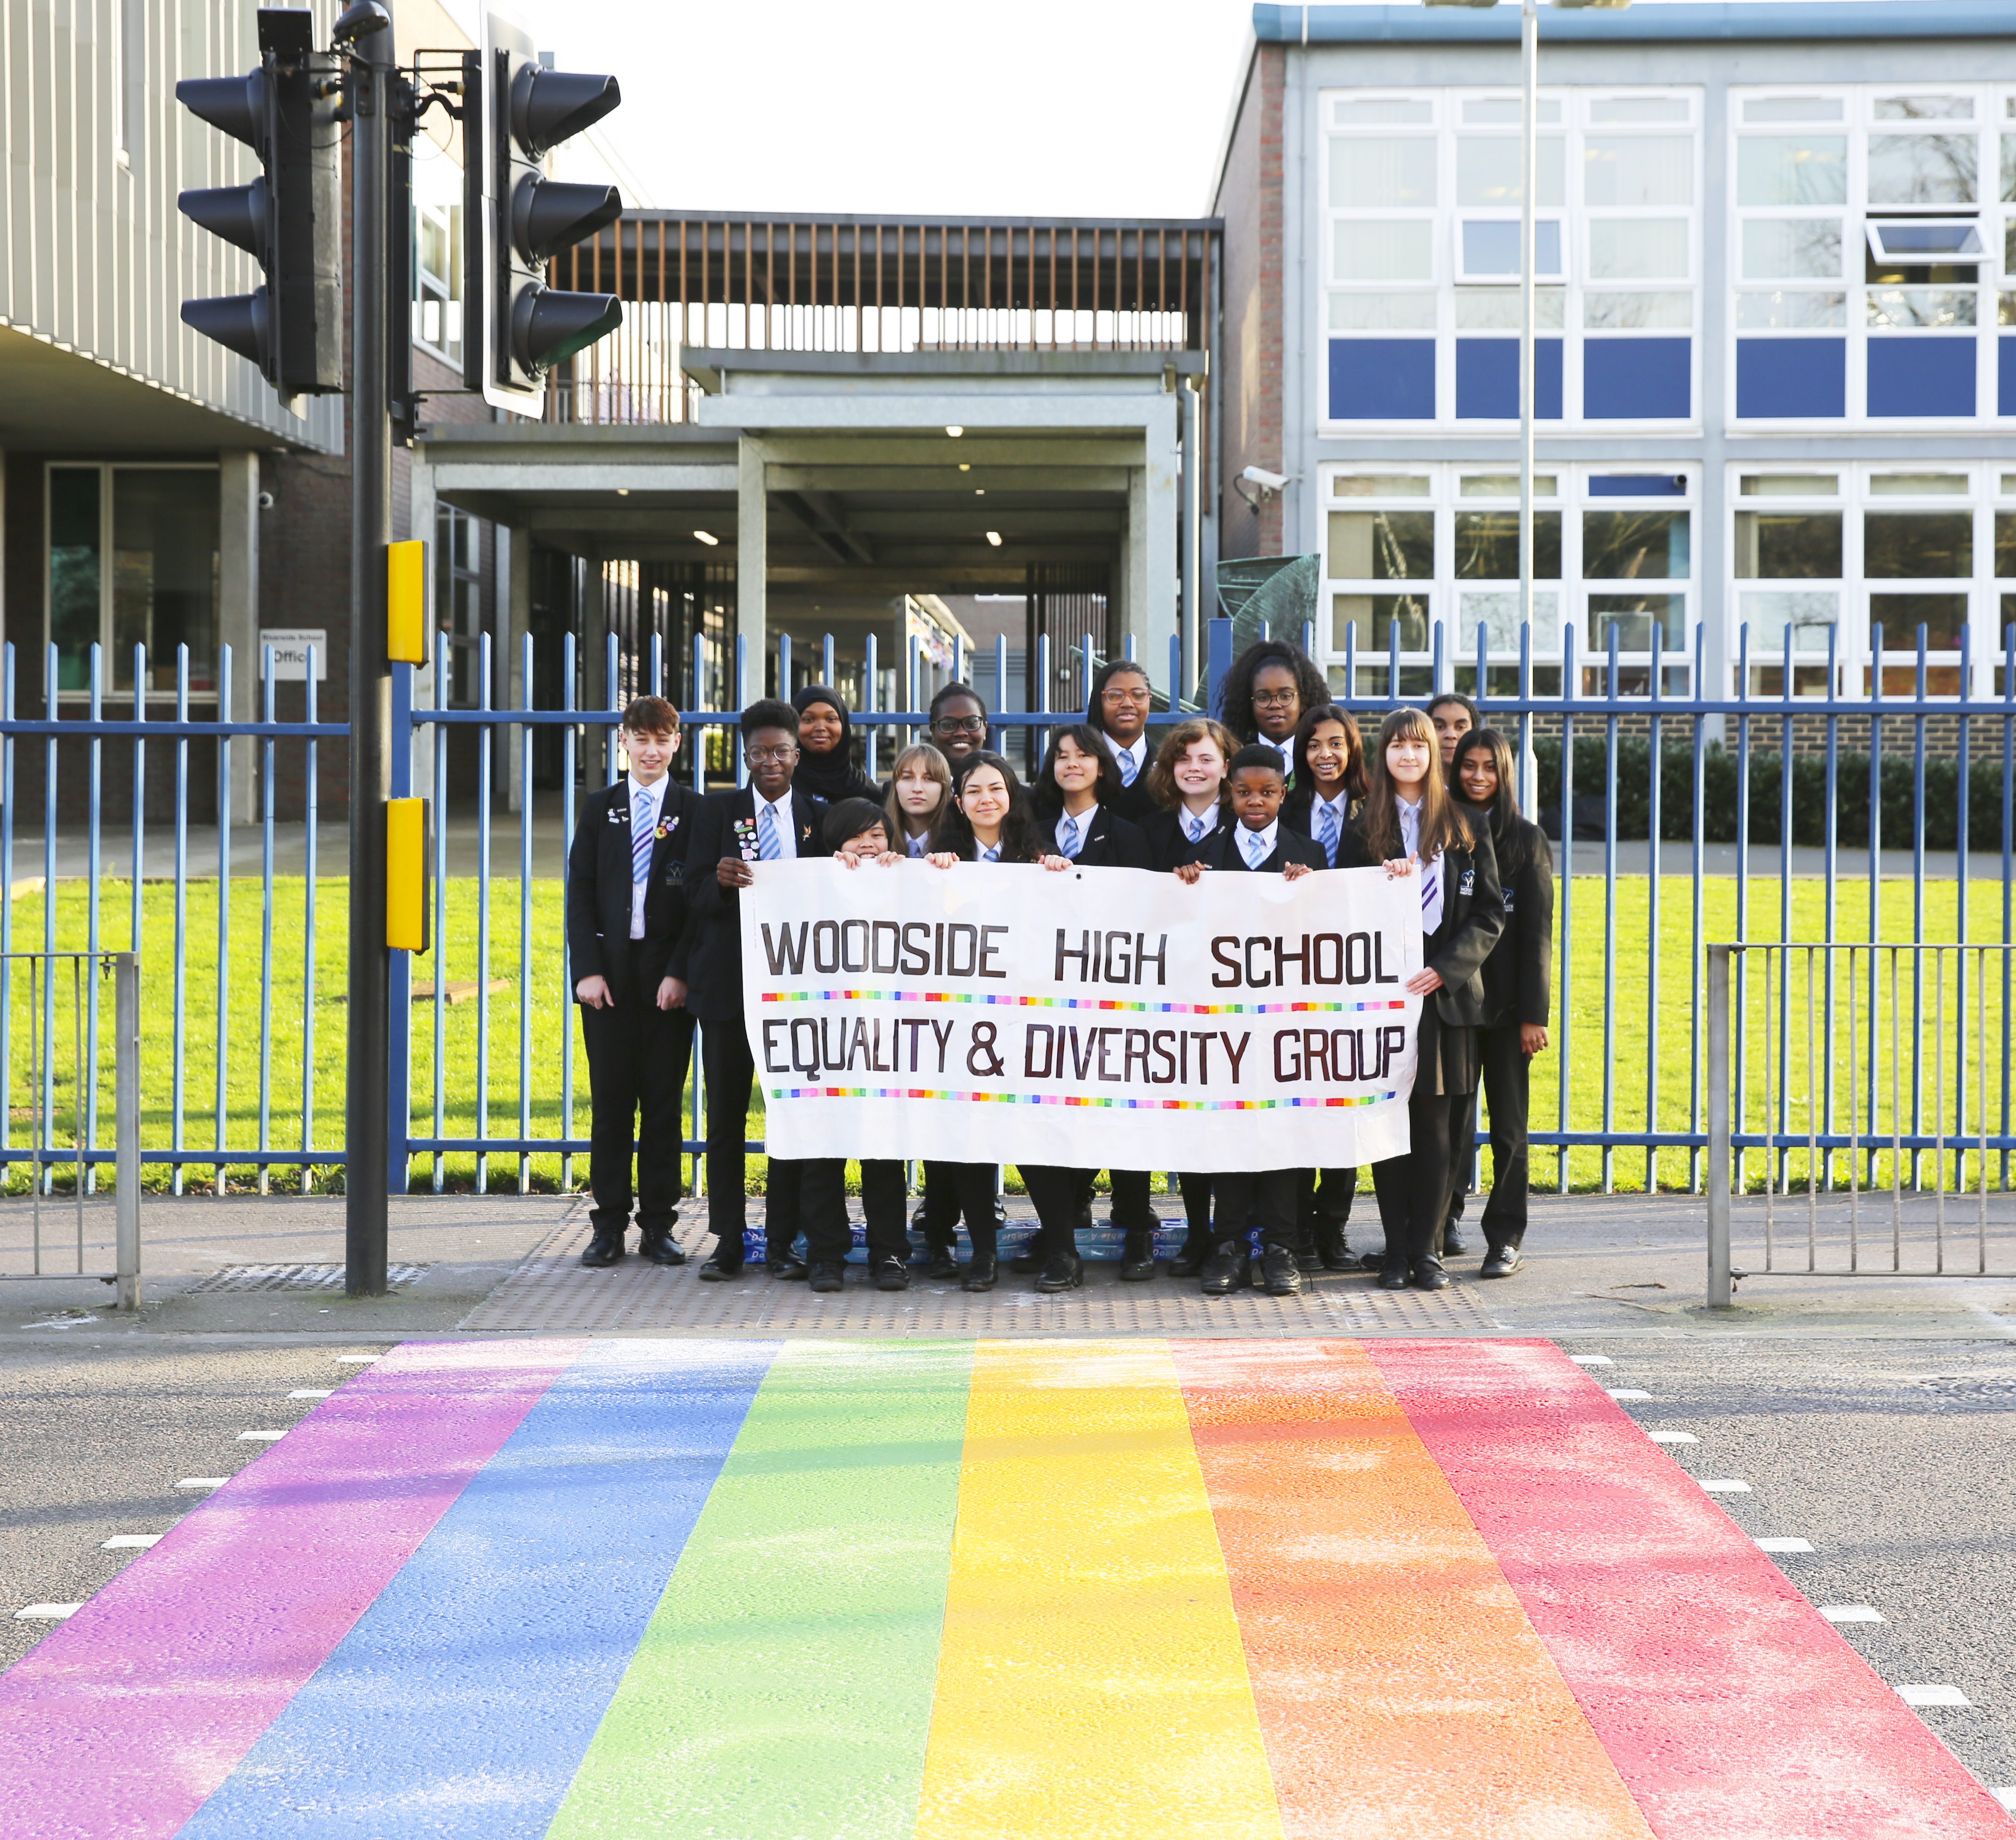 Woodside High School's Equality & Diversity Group